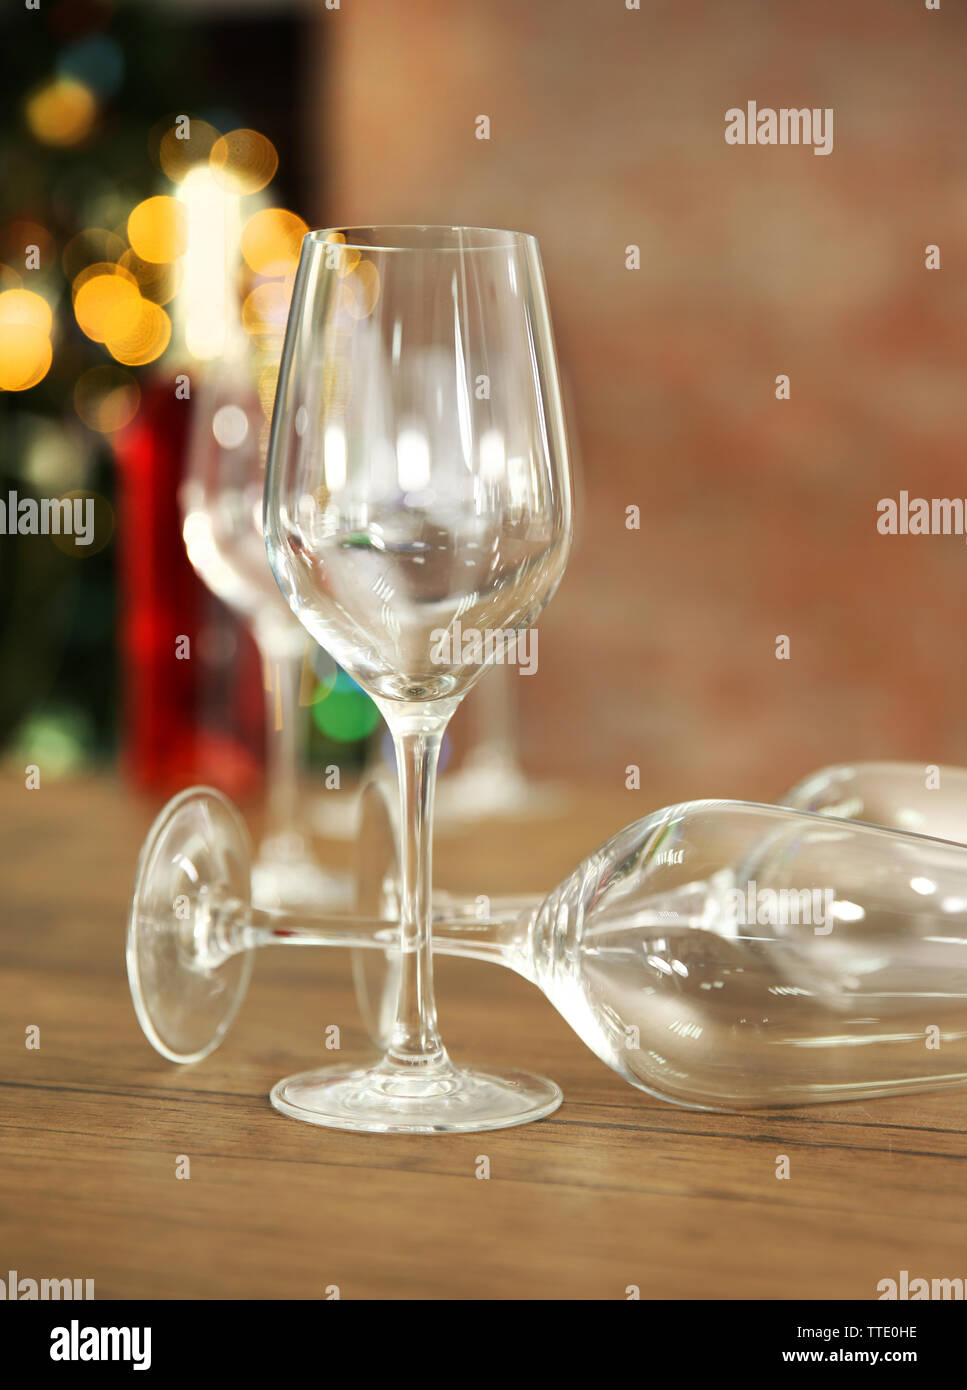 Empty wine glasses with bottle on wooden table against blurred background Stock Photo